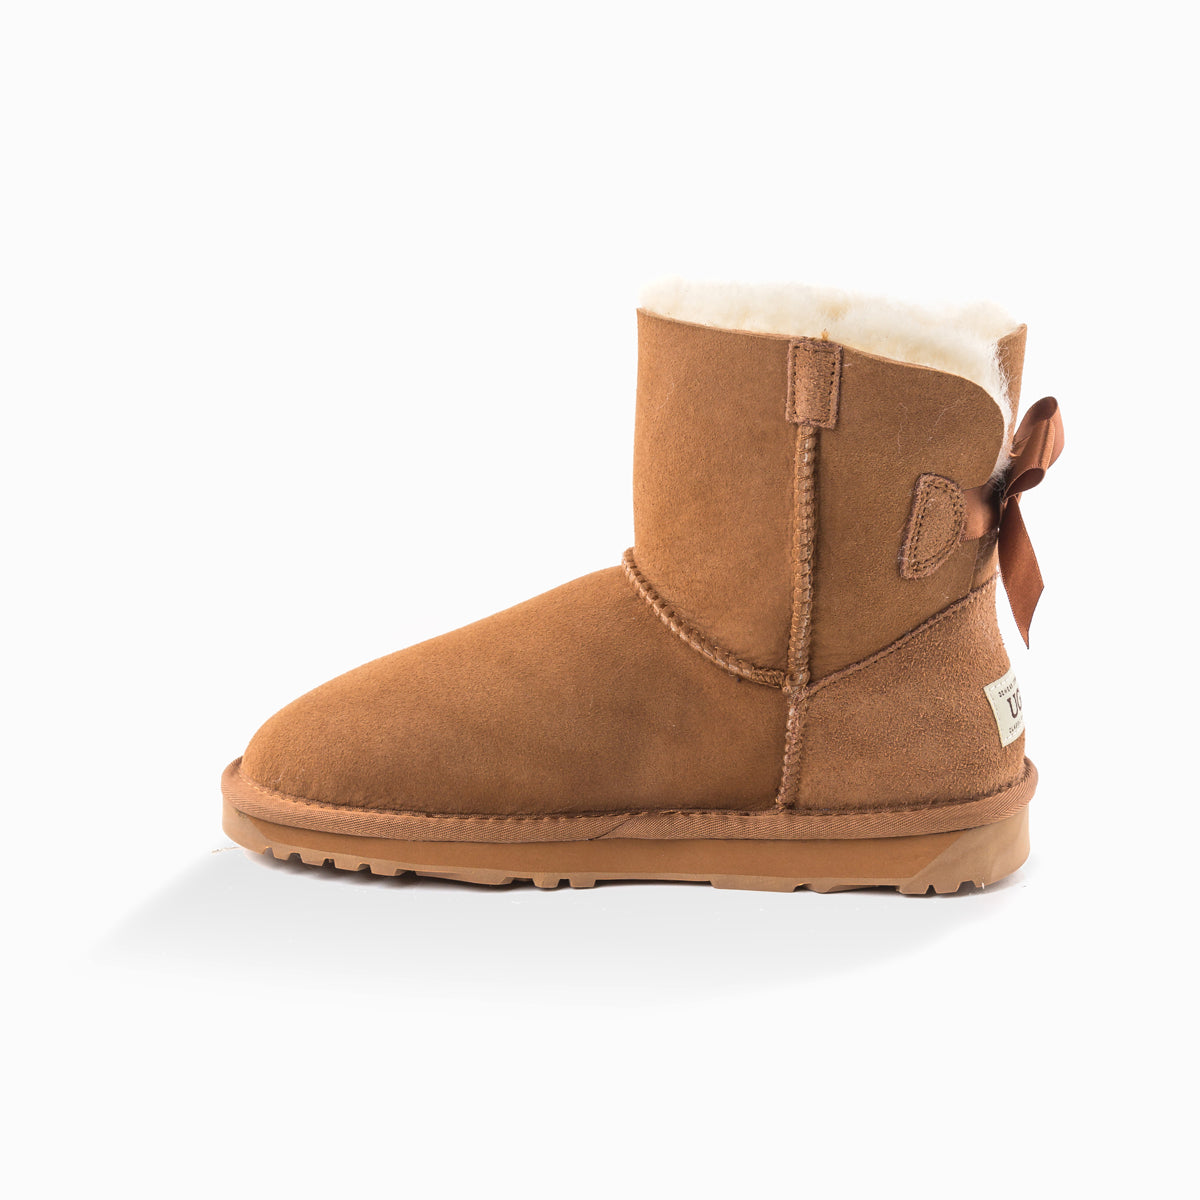 Ugg Classic Mini Bailey Bow Boots (Water Resistant)-Boots-PEROZ Accessories